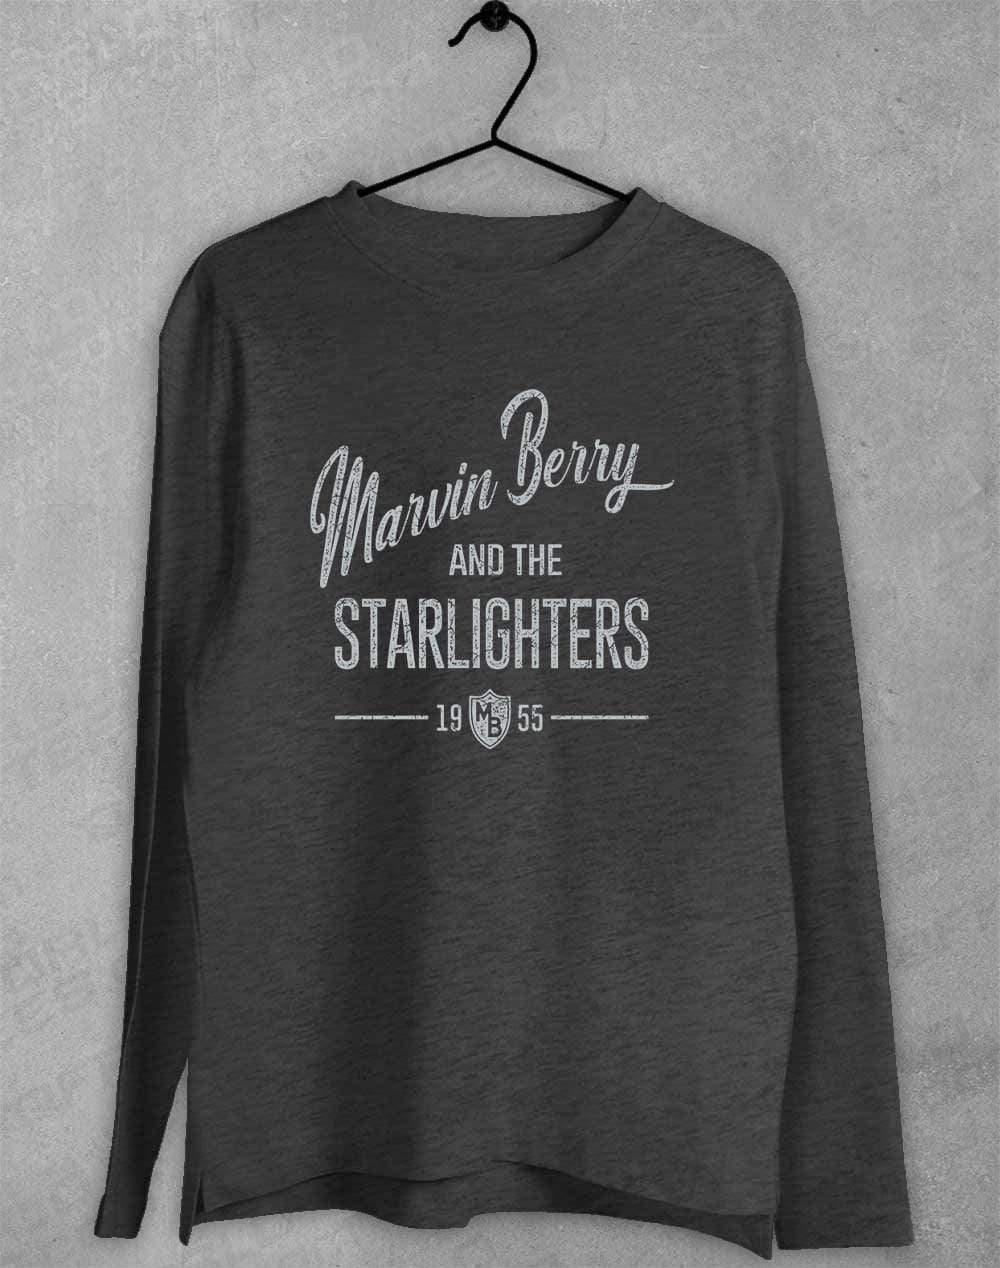 Marvin Berry and the Starlighters Long Sleeve T-Shirt S / Dark Heather  - Off World Tees